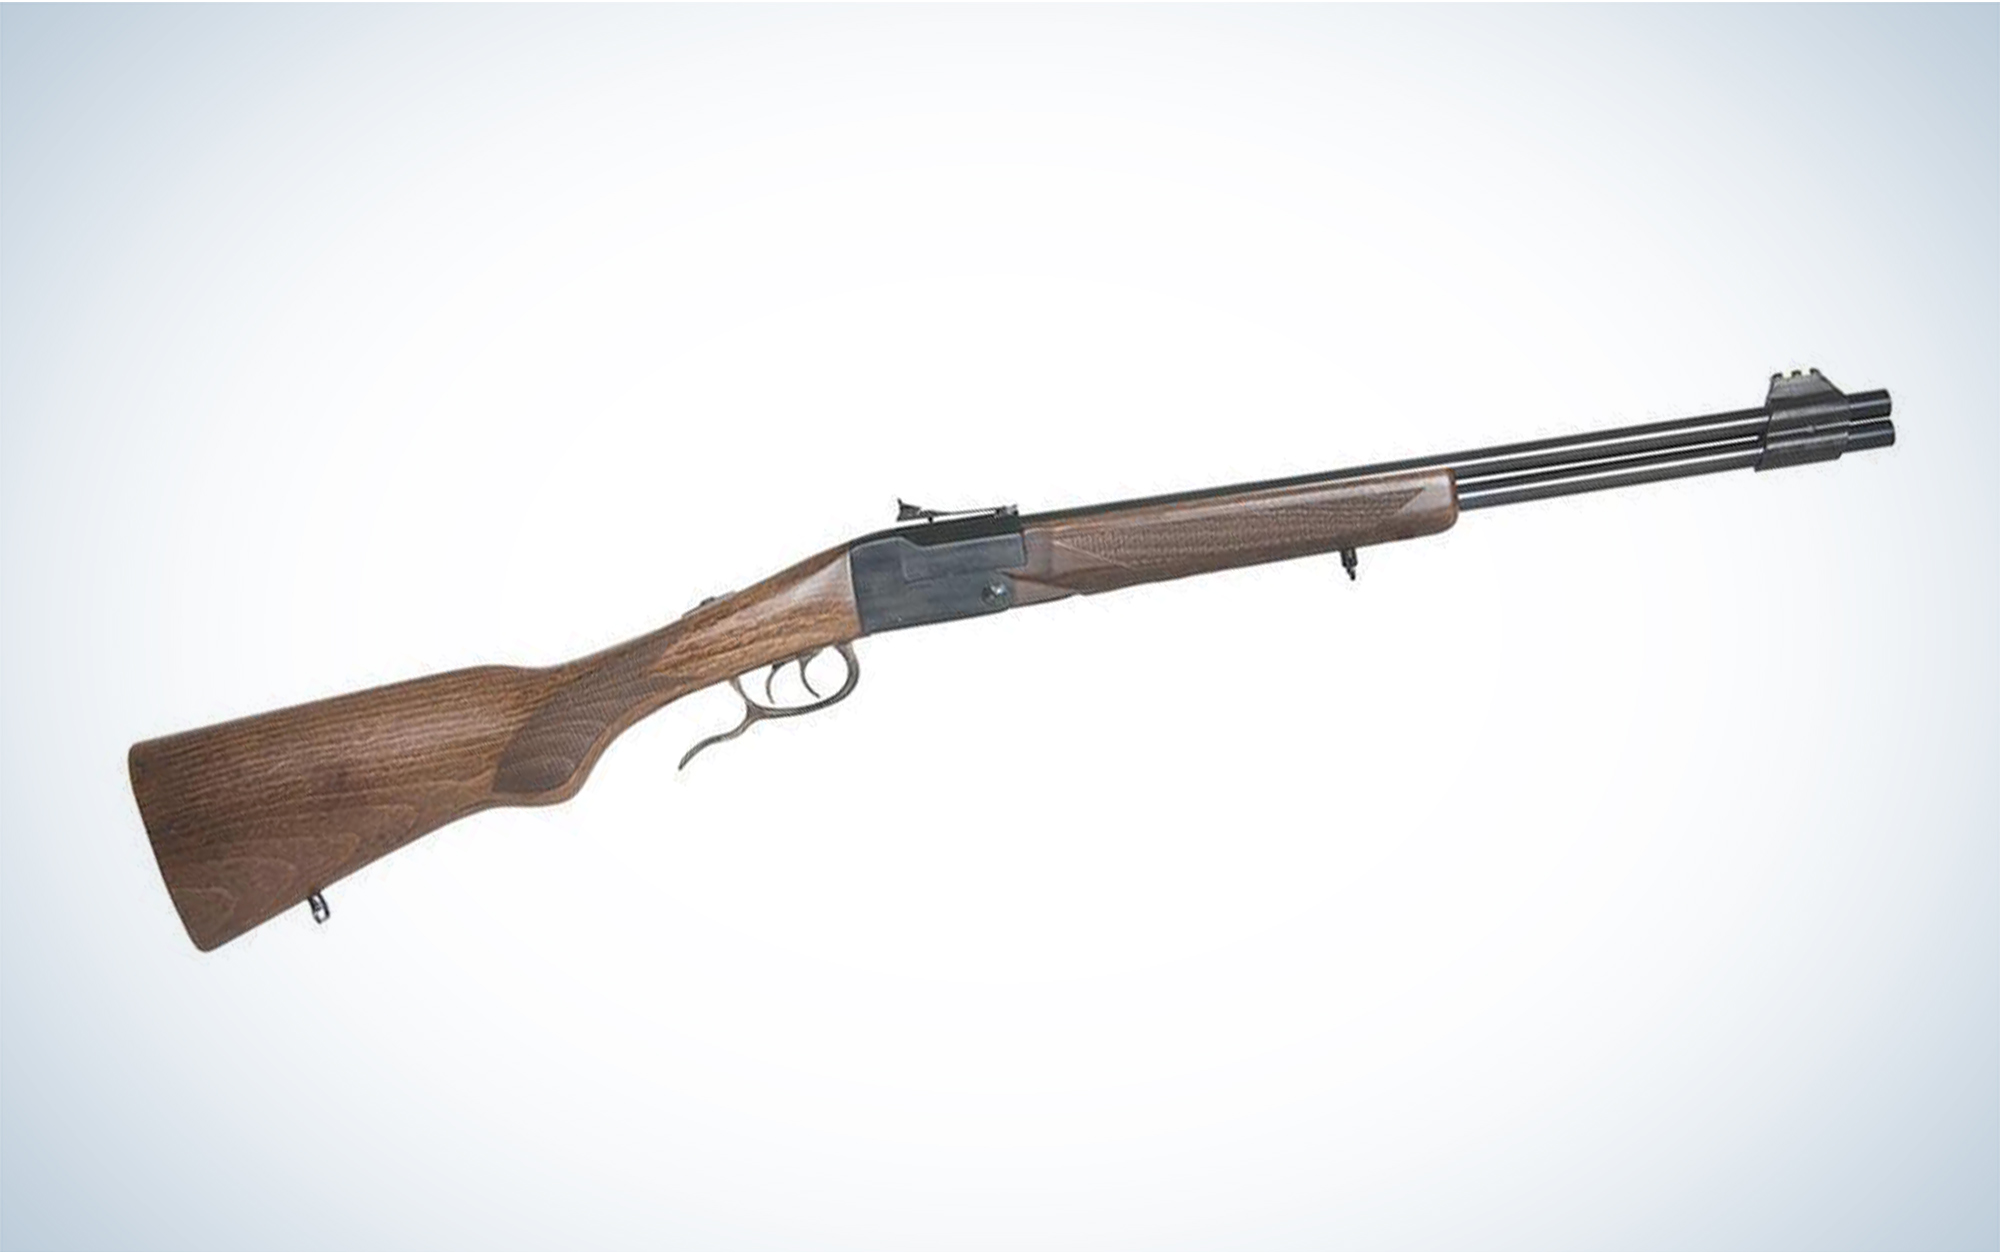 The Chiappa Double Badger shotgun is a 20 gauge/22 long rifle over under.